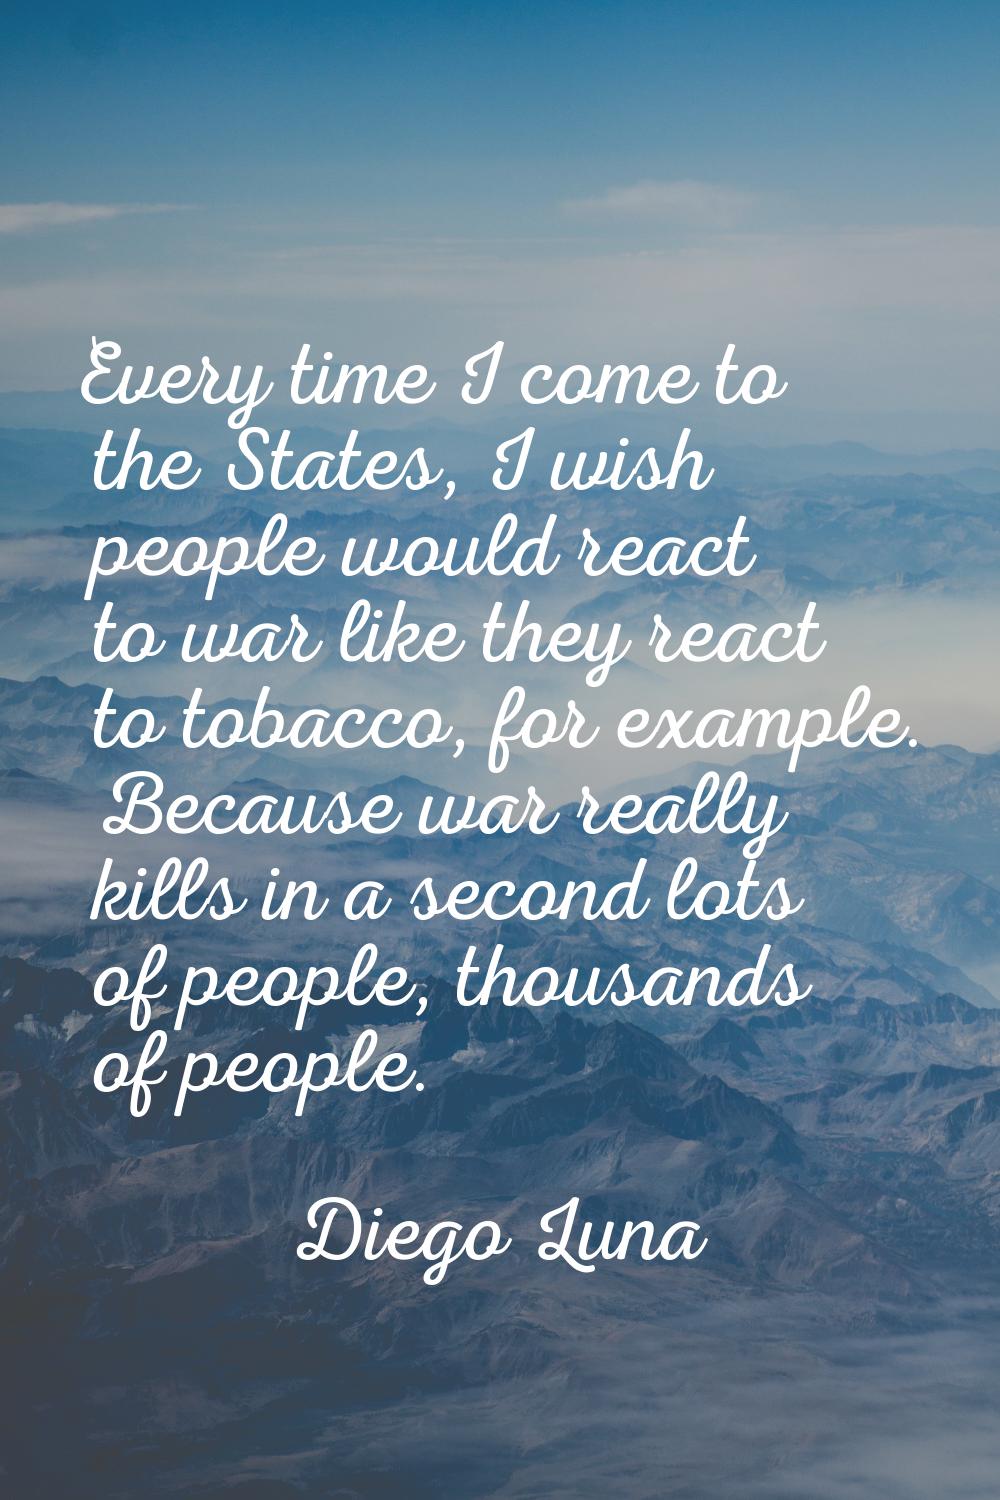 Every time I come to the States, I wish people would react to war like they react to tobacco, for e